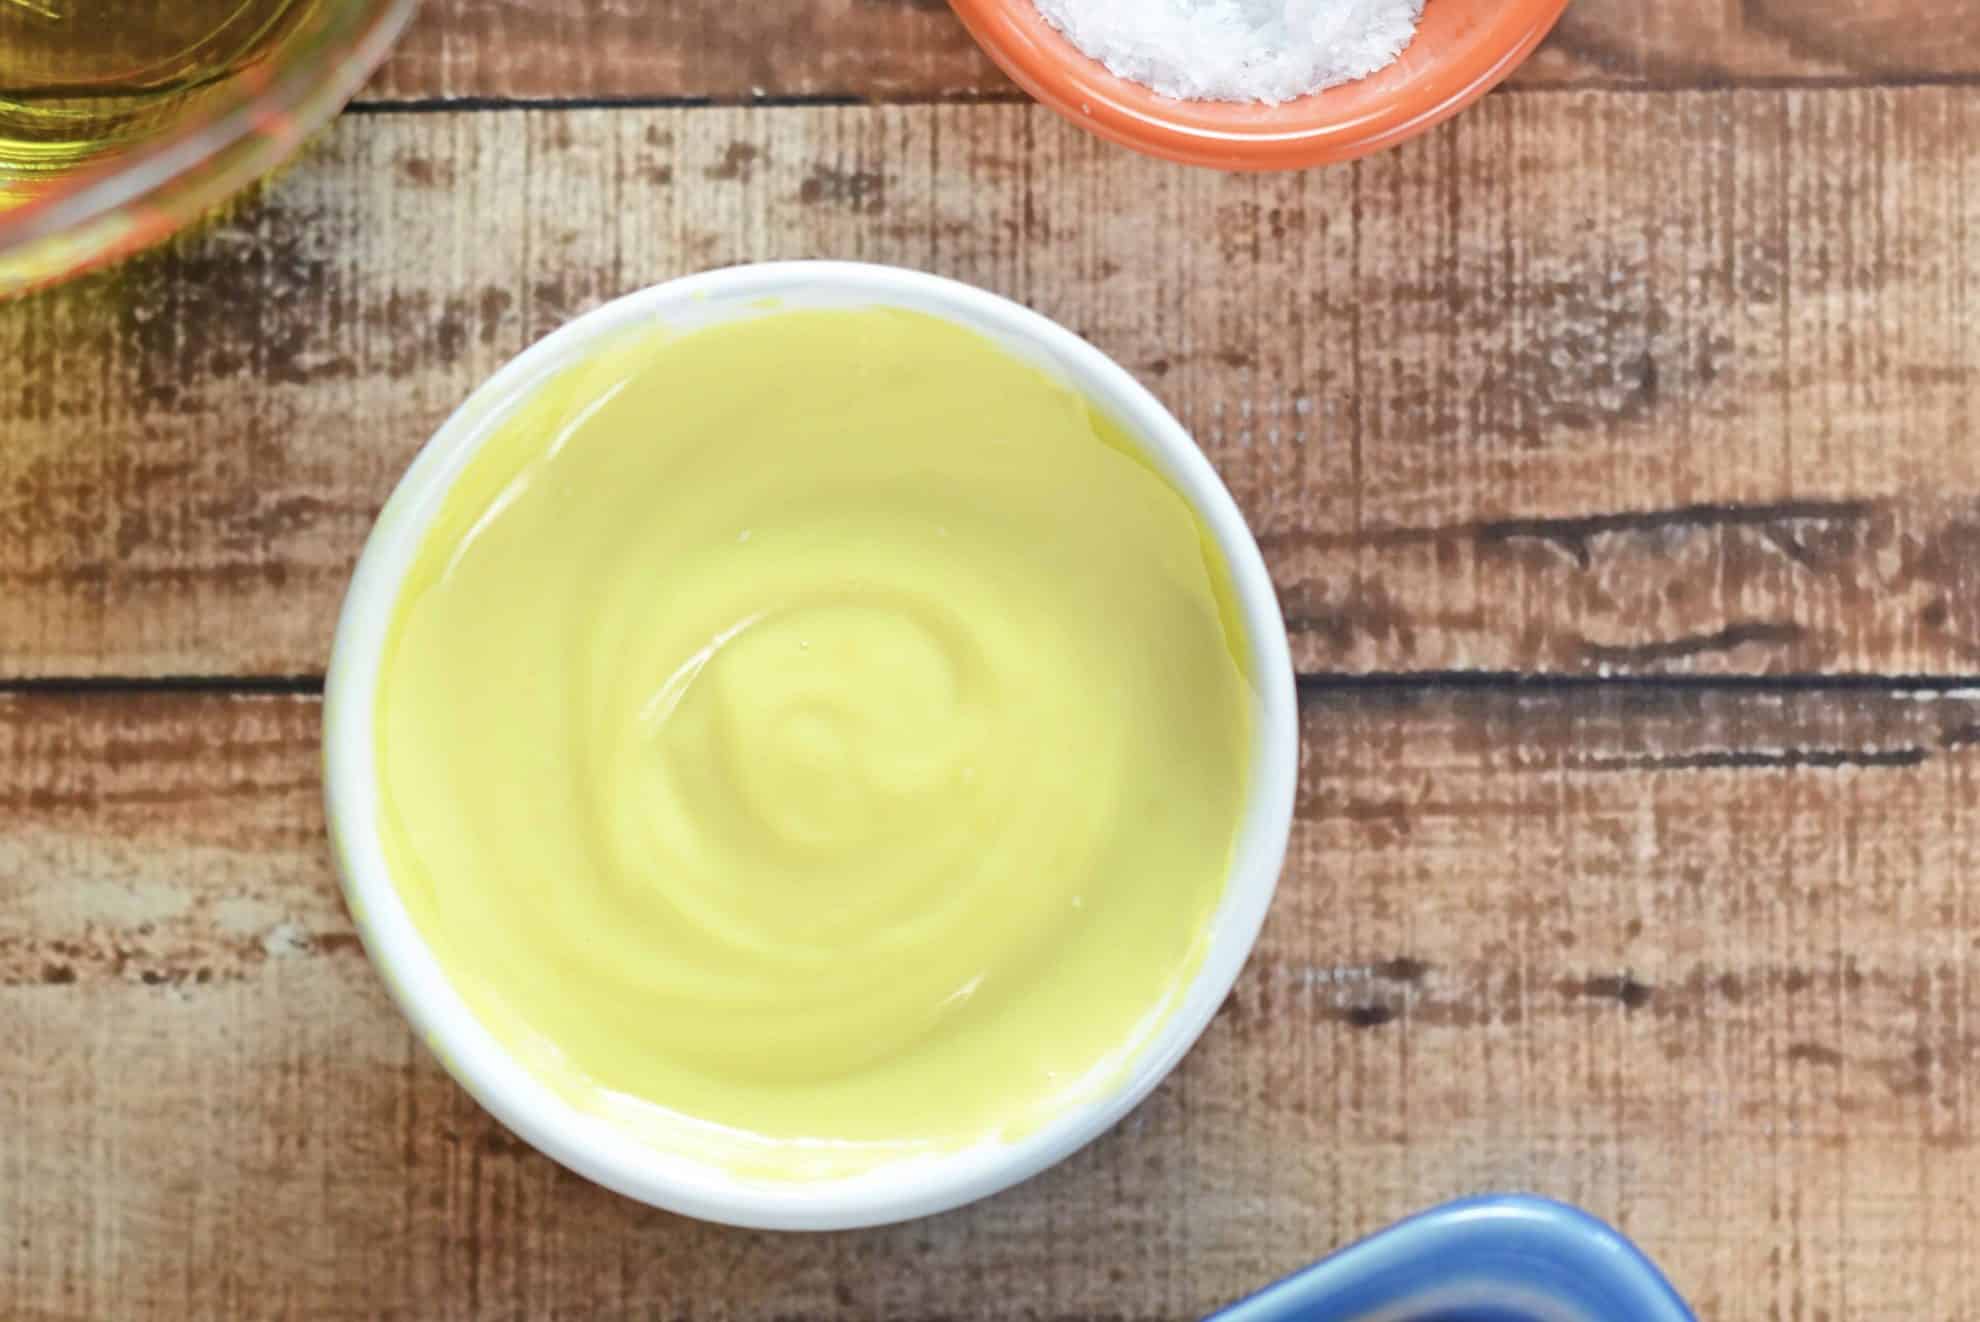 Do you know how easy it is to make homemade mayonnaise? SO EASY! Make my blender mayonnaise with 3 ingredients and 3 minutes today! #homemademayonnaise #blendermayonnause #howtomakemayonnaise www.savoryexperiments.com